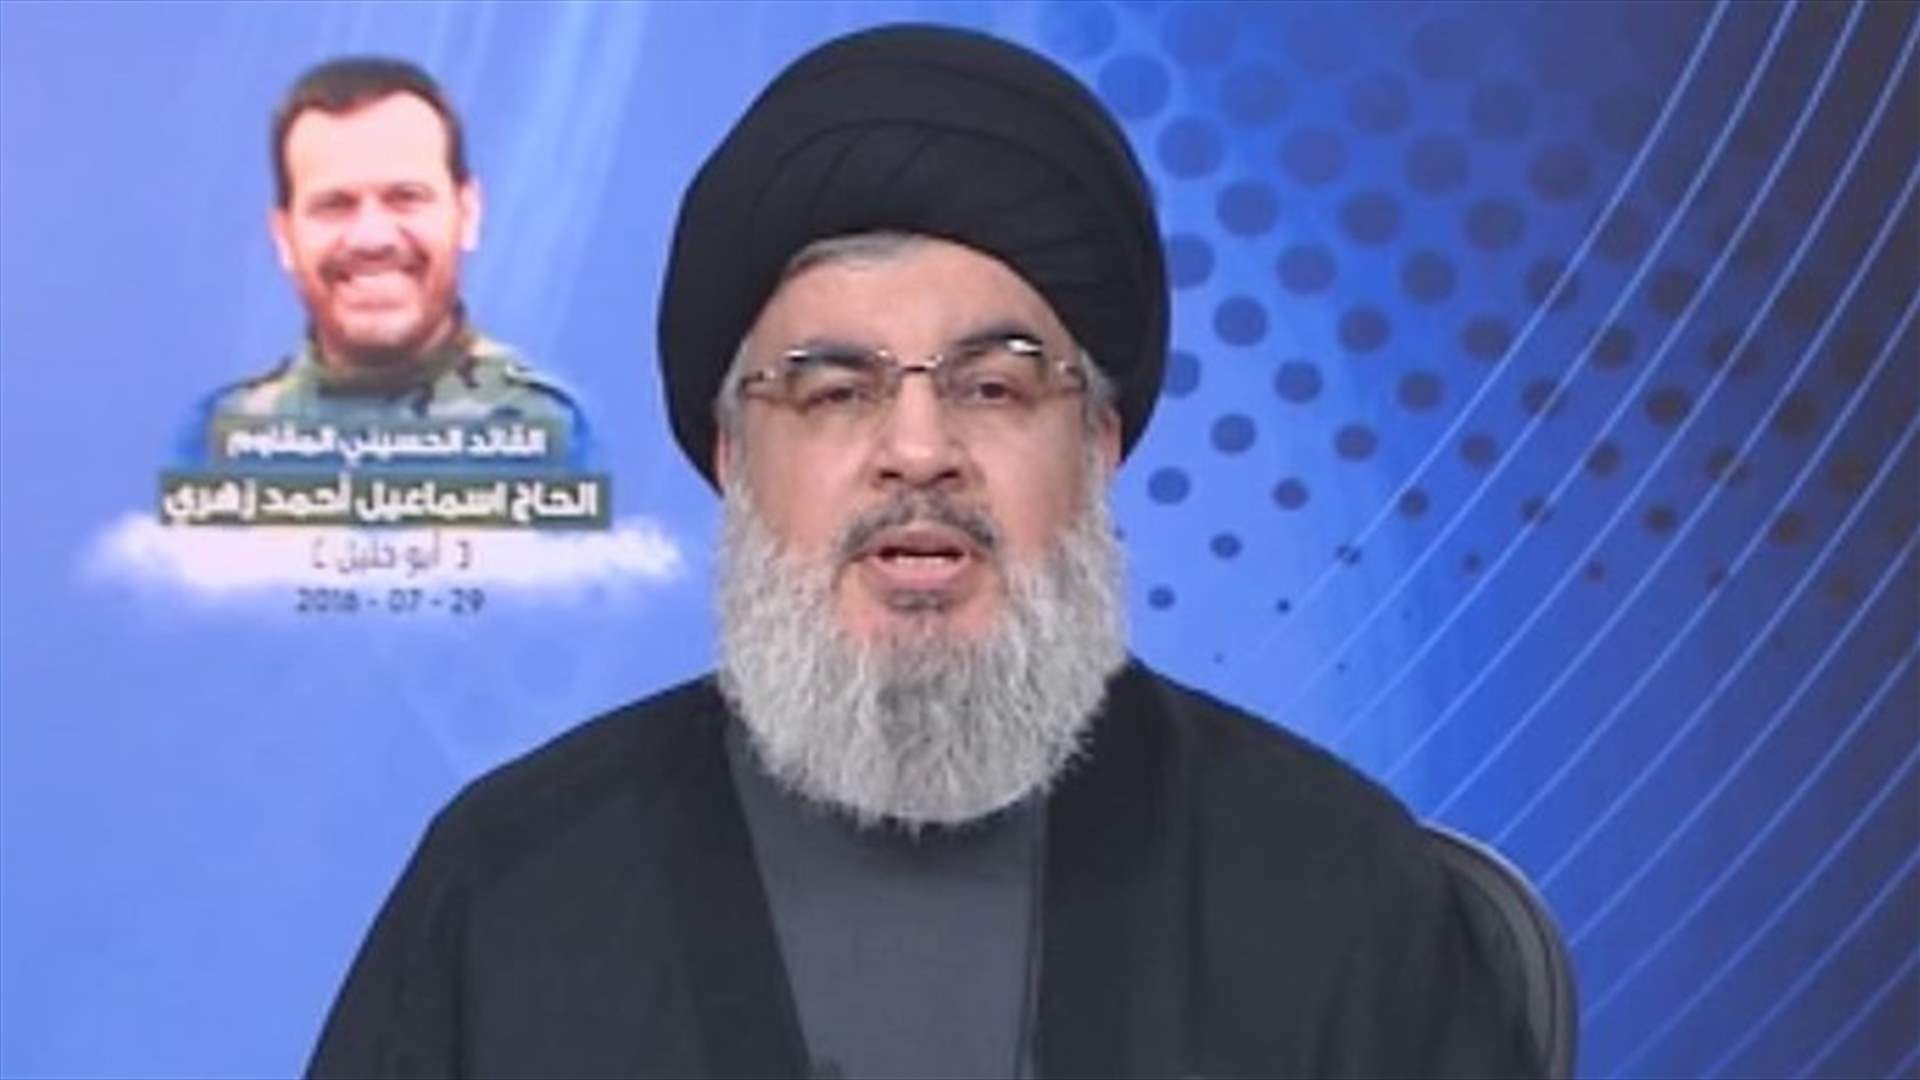 Nasrallah says Saudi communications with Israel are worst recent development 